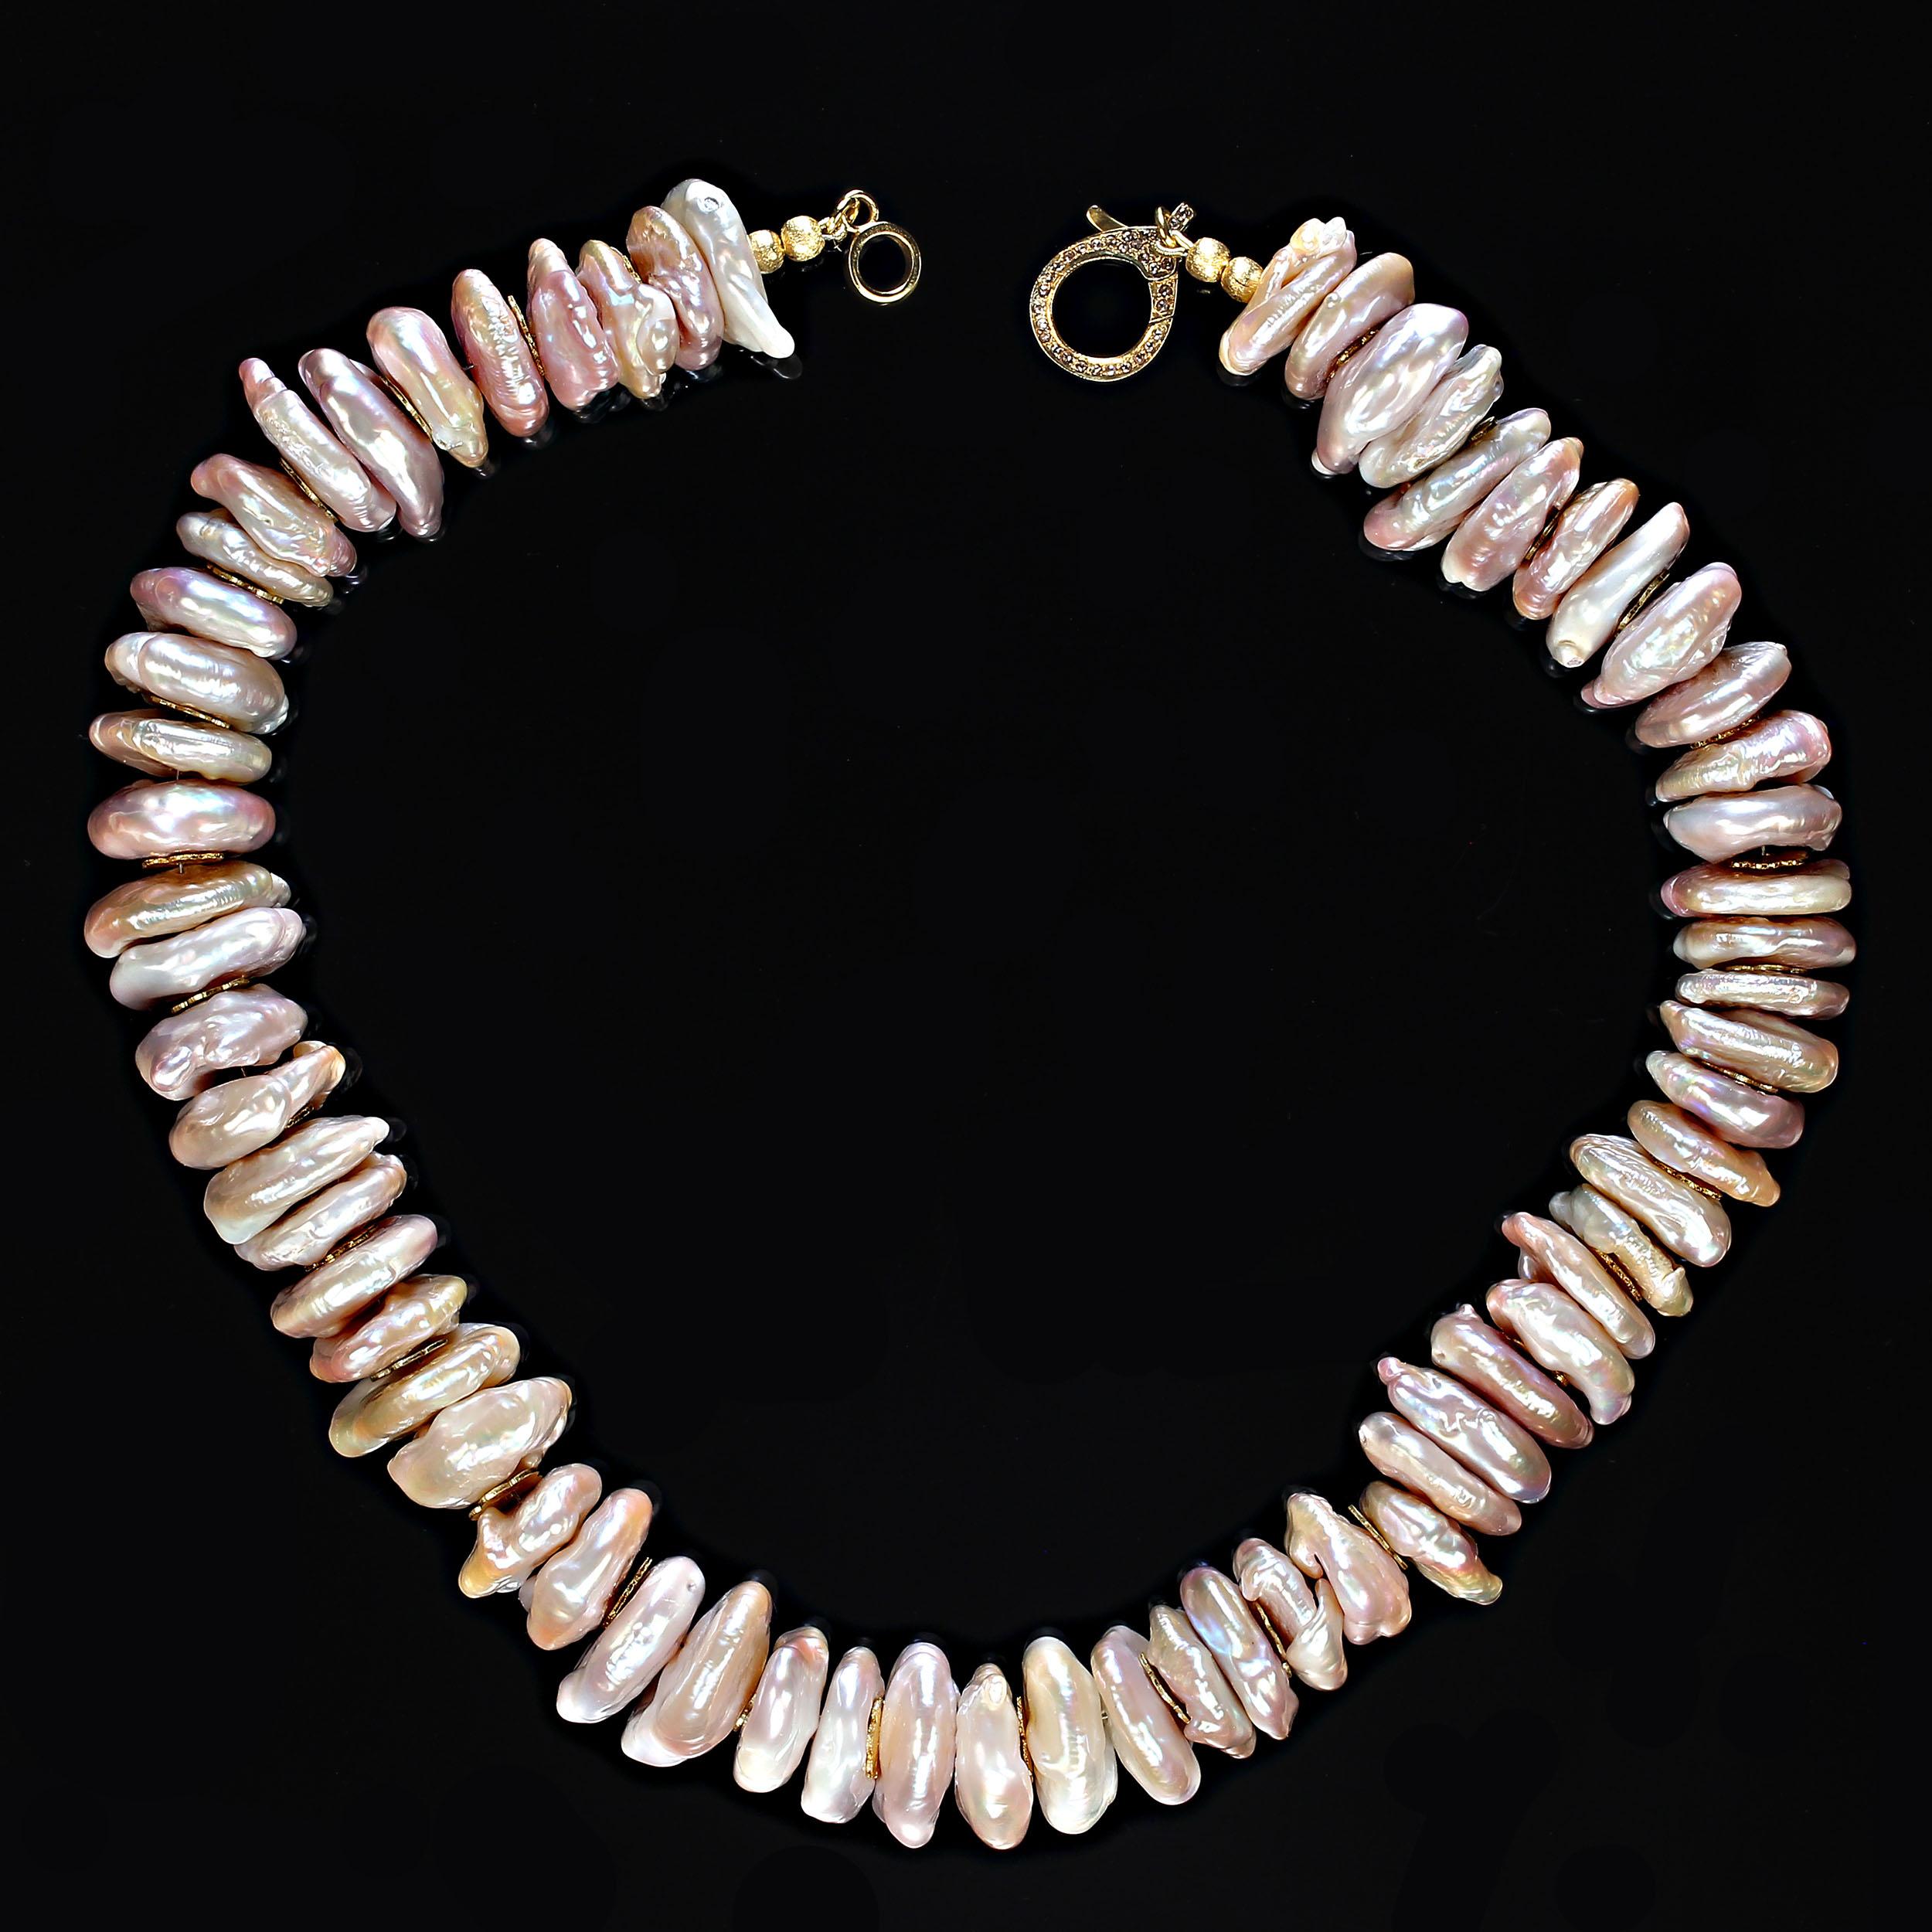 17.5 Inch necklace of center drilled 18mm light peachy/mauve coin pearls.  These gorgeous pearls are each unique and therefore don't sit perfectly together. They are iridescent and their unique shapes and bumps add to the flash of light. The gold